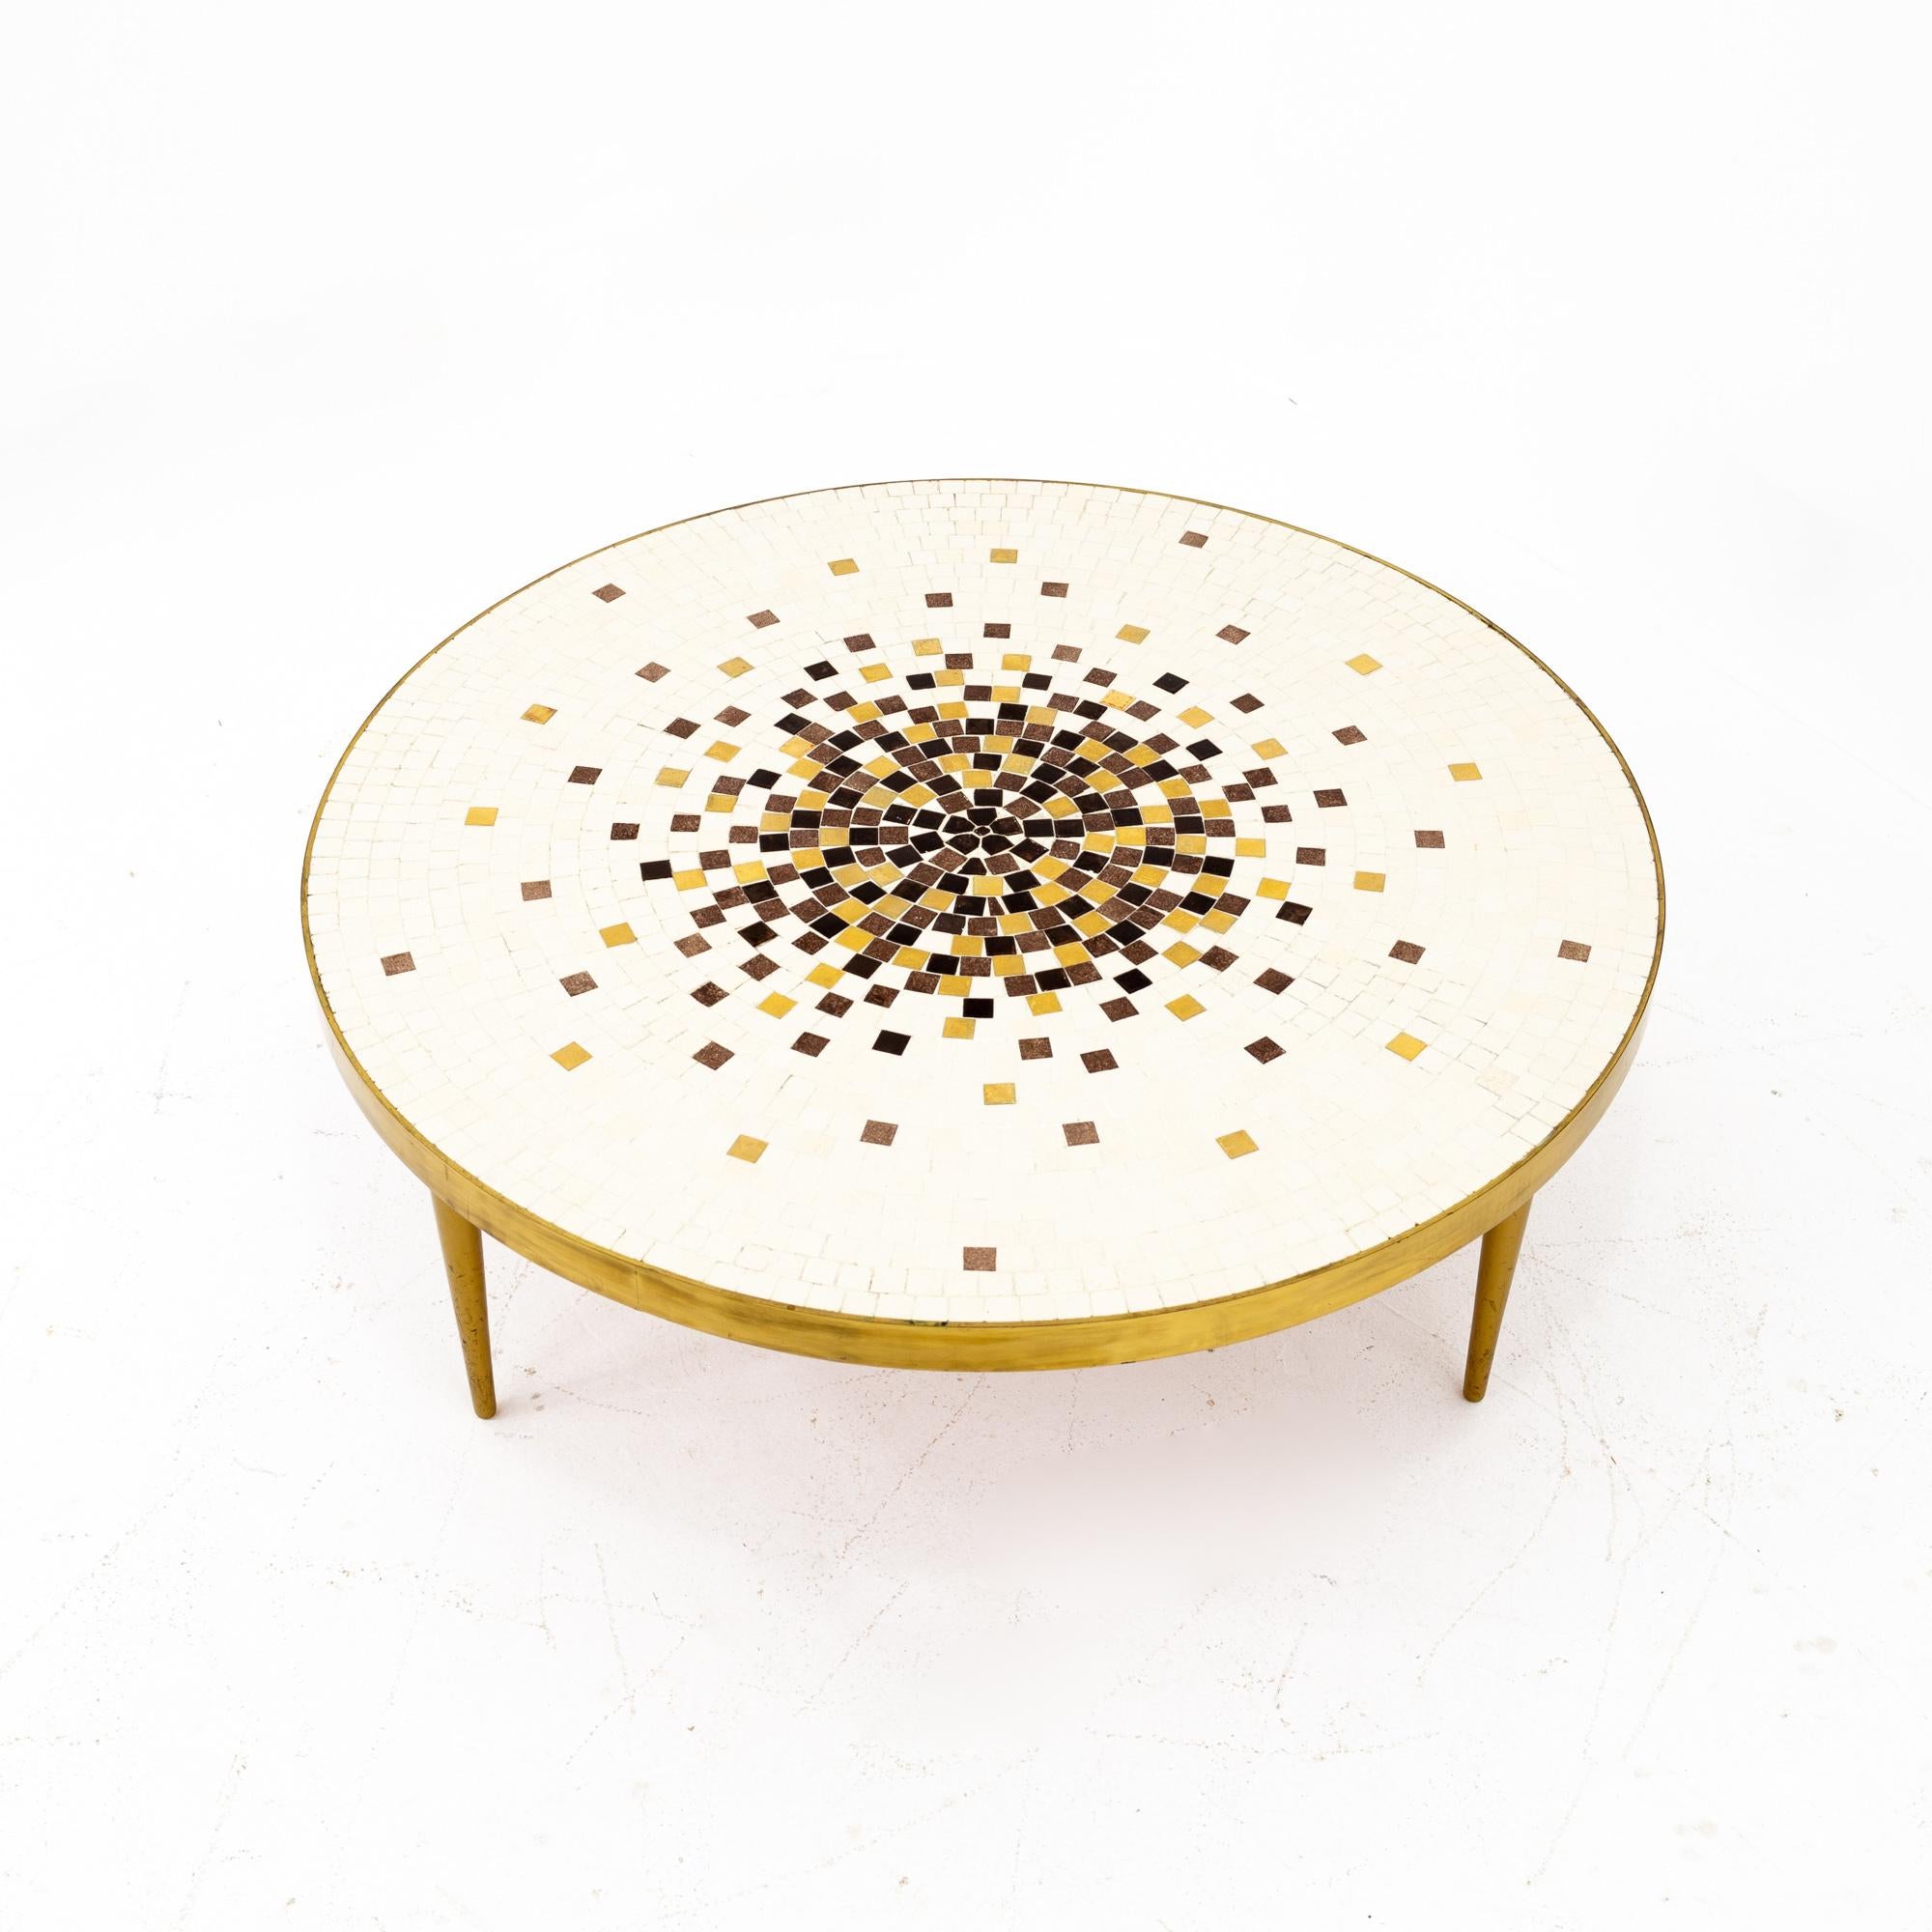 Martz style midcentury round brass mosaic tile coffee table
This table is 36 wide and 36 deep by 14 inches high

Each piece of furniture is available in what we call restored vintage condition. Upon purchase it is thoroughly cleaned and minor